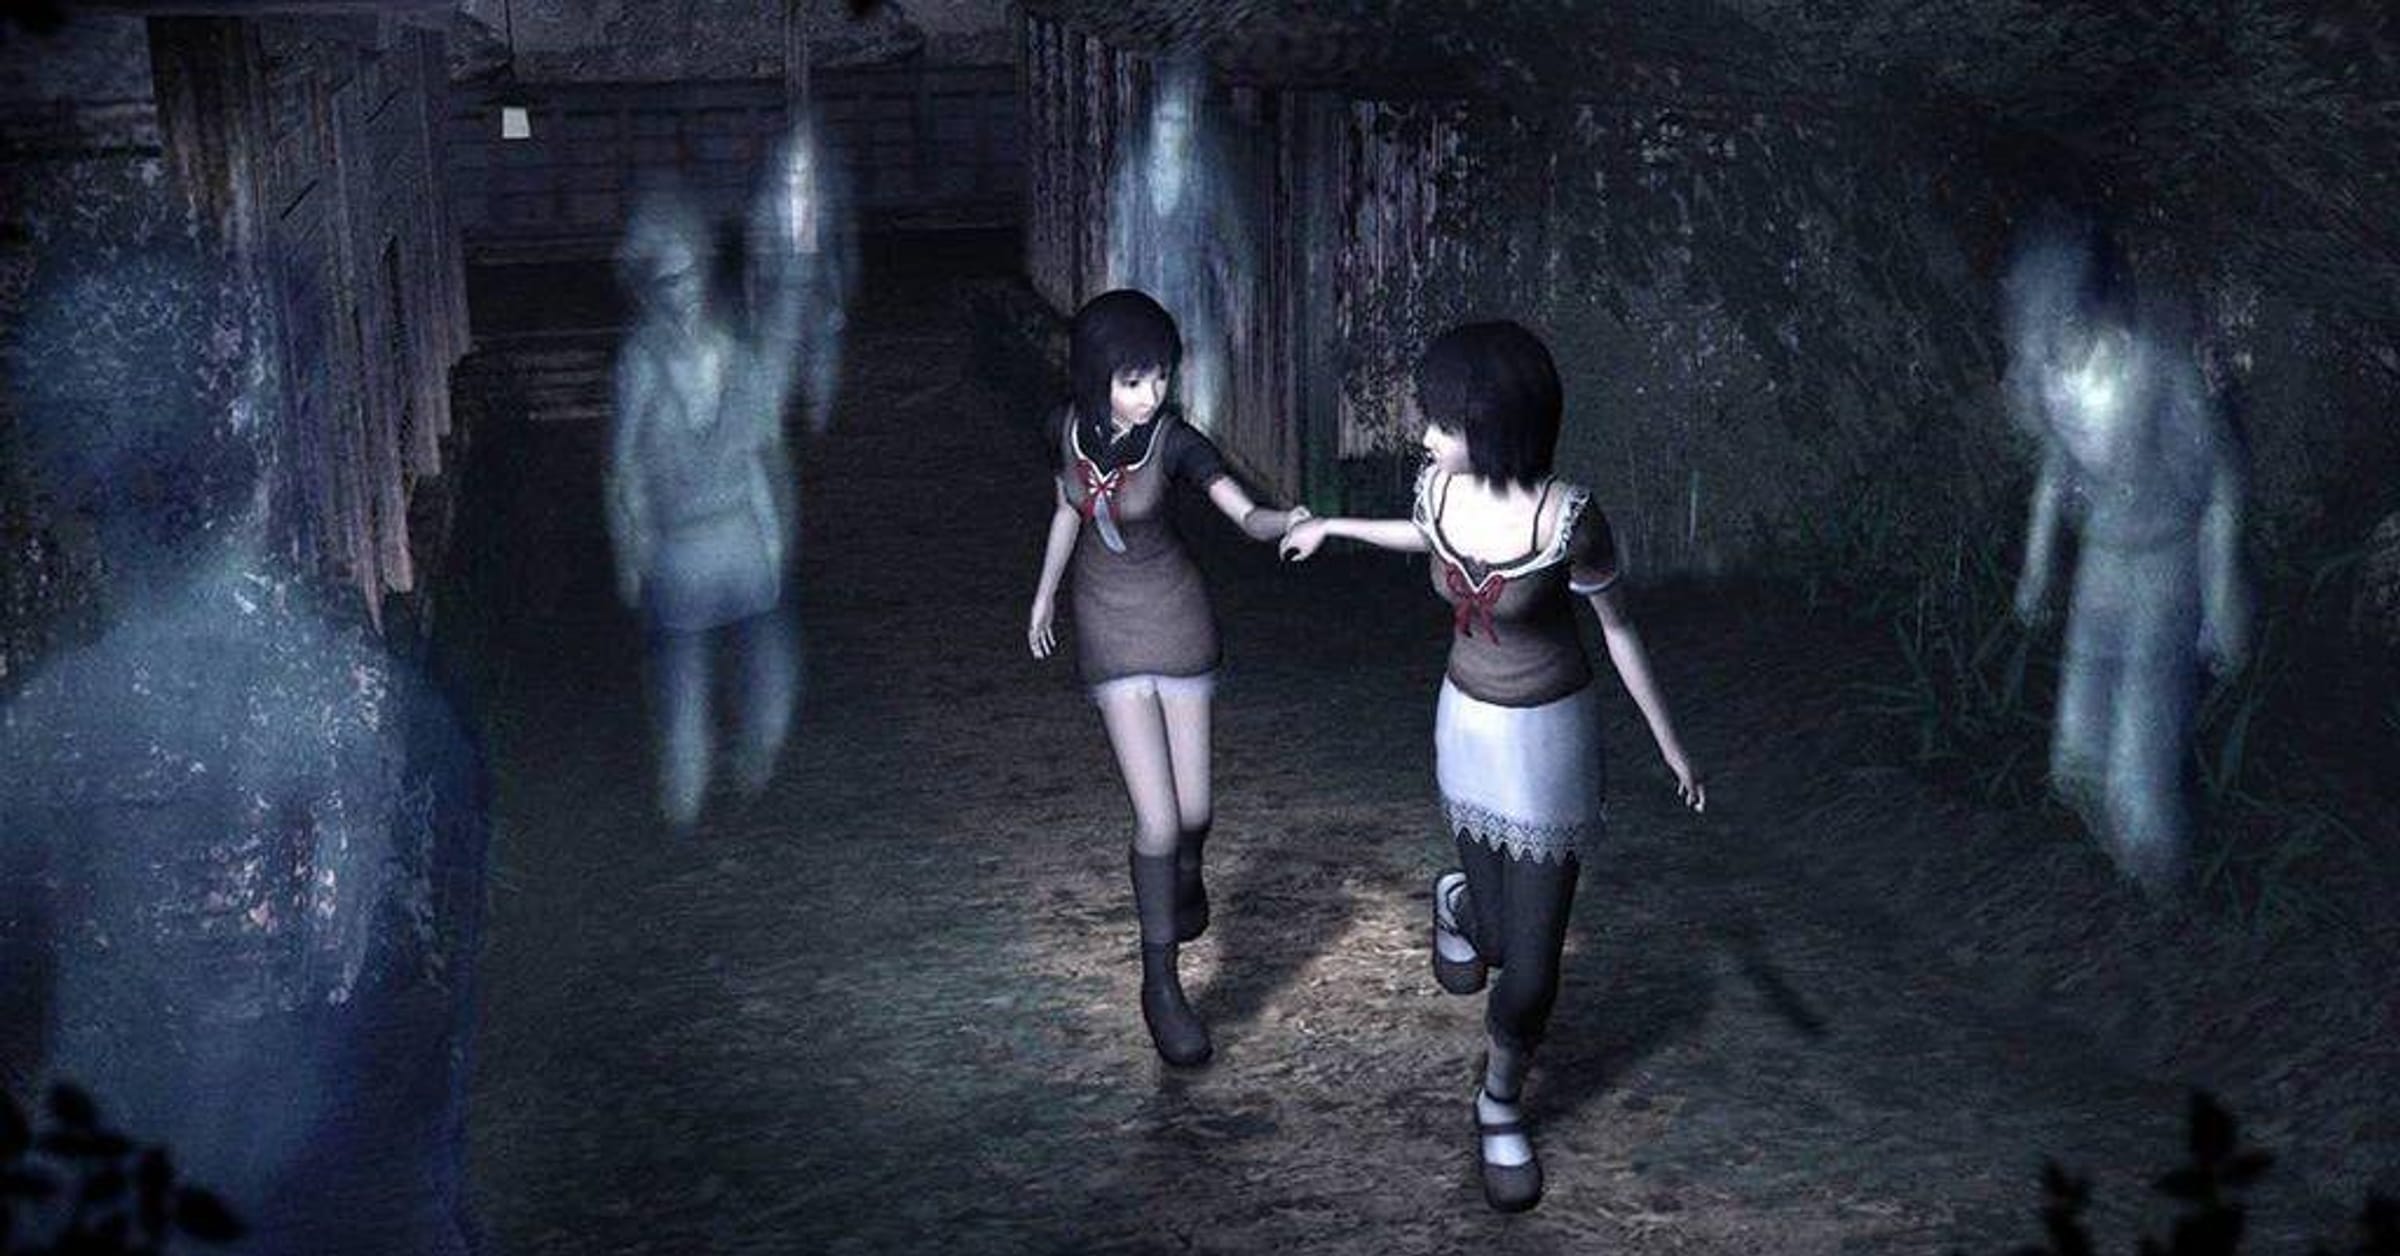 TOP 8 PLAYSTATION 2 HORROR GAMES (THE SCARIEST ONES) 